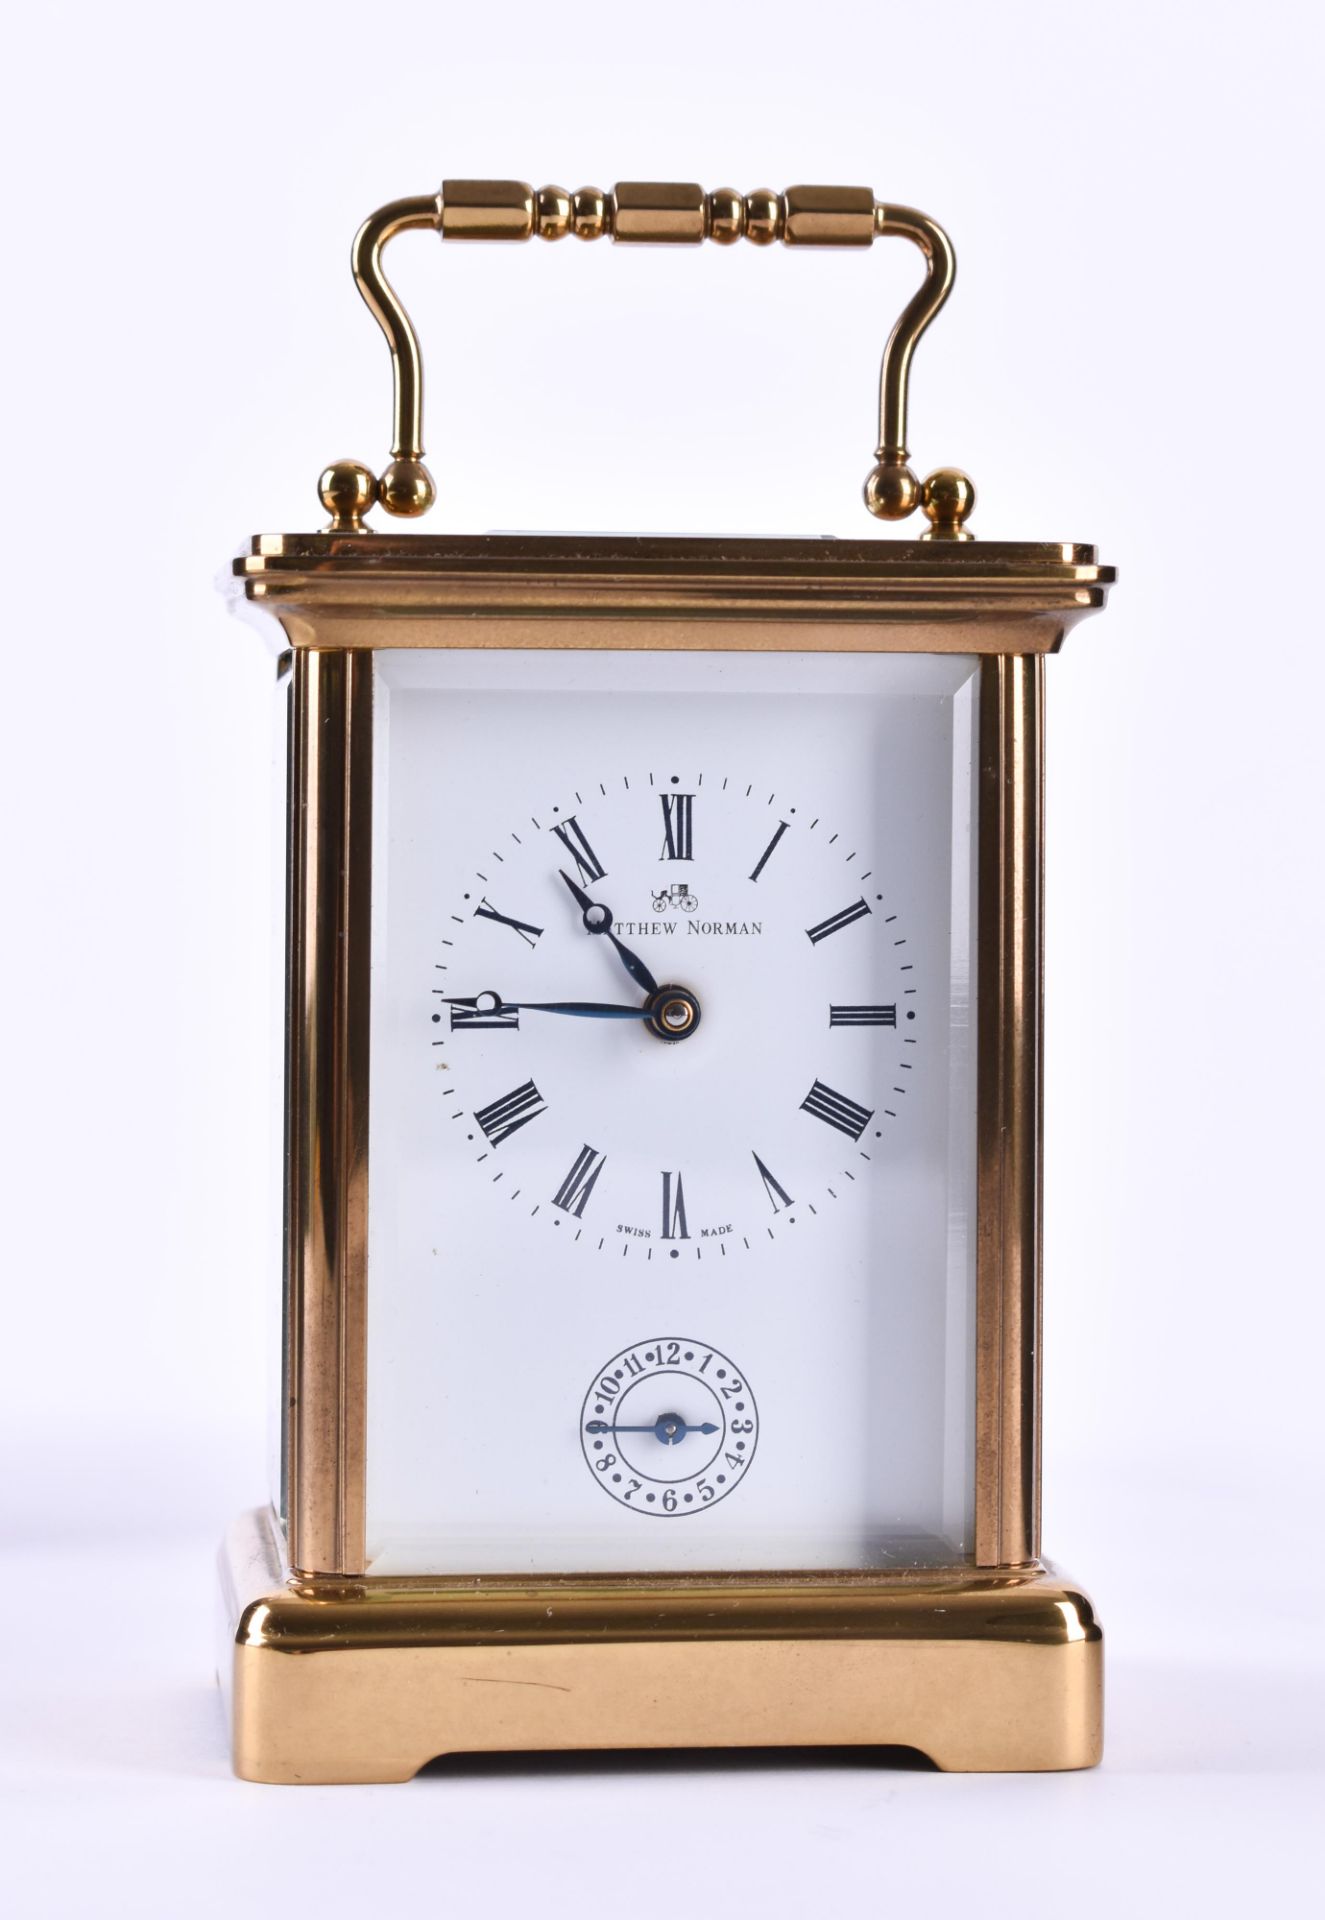 Small travel alarm clock Matthew NormanSwitzerland, brass housing glazed on all sides with